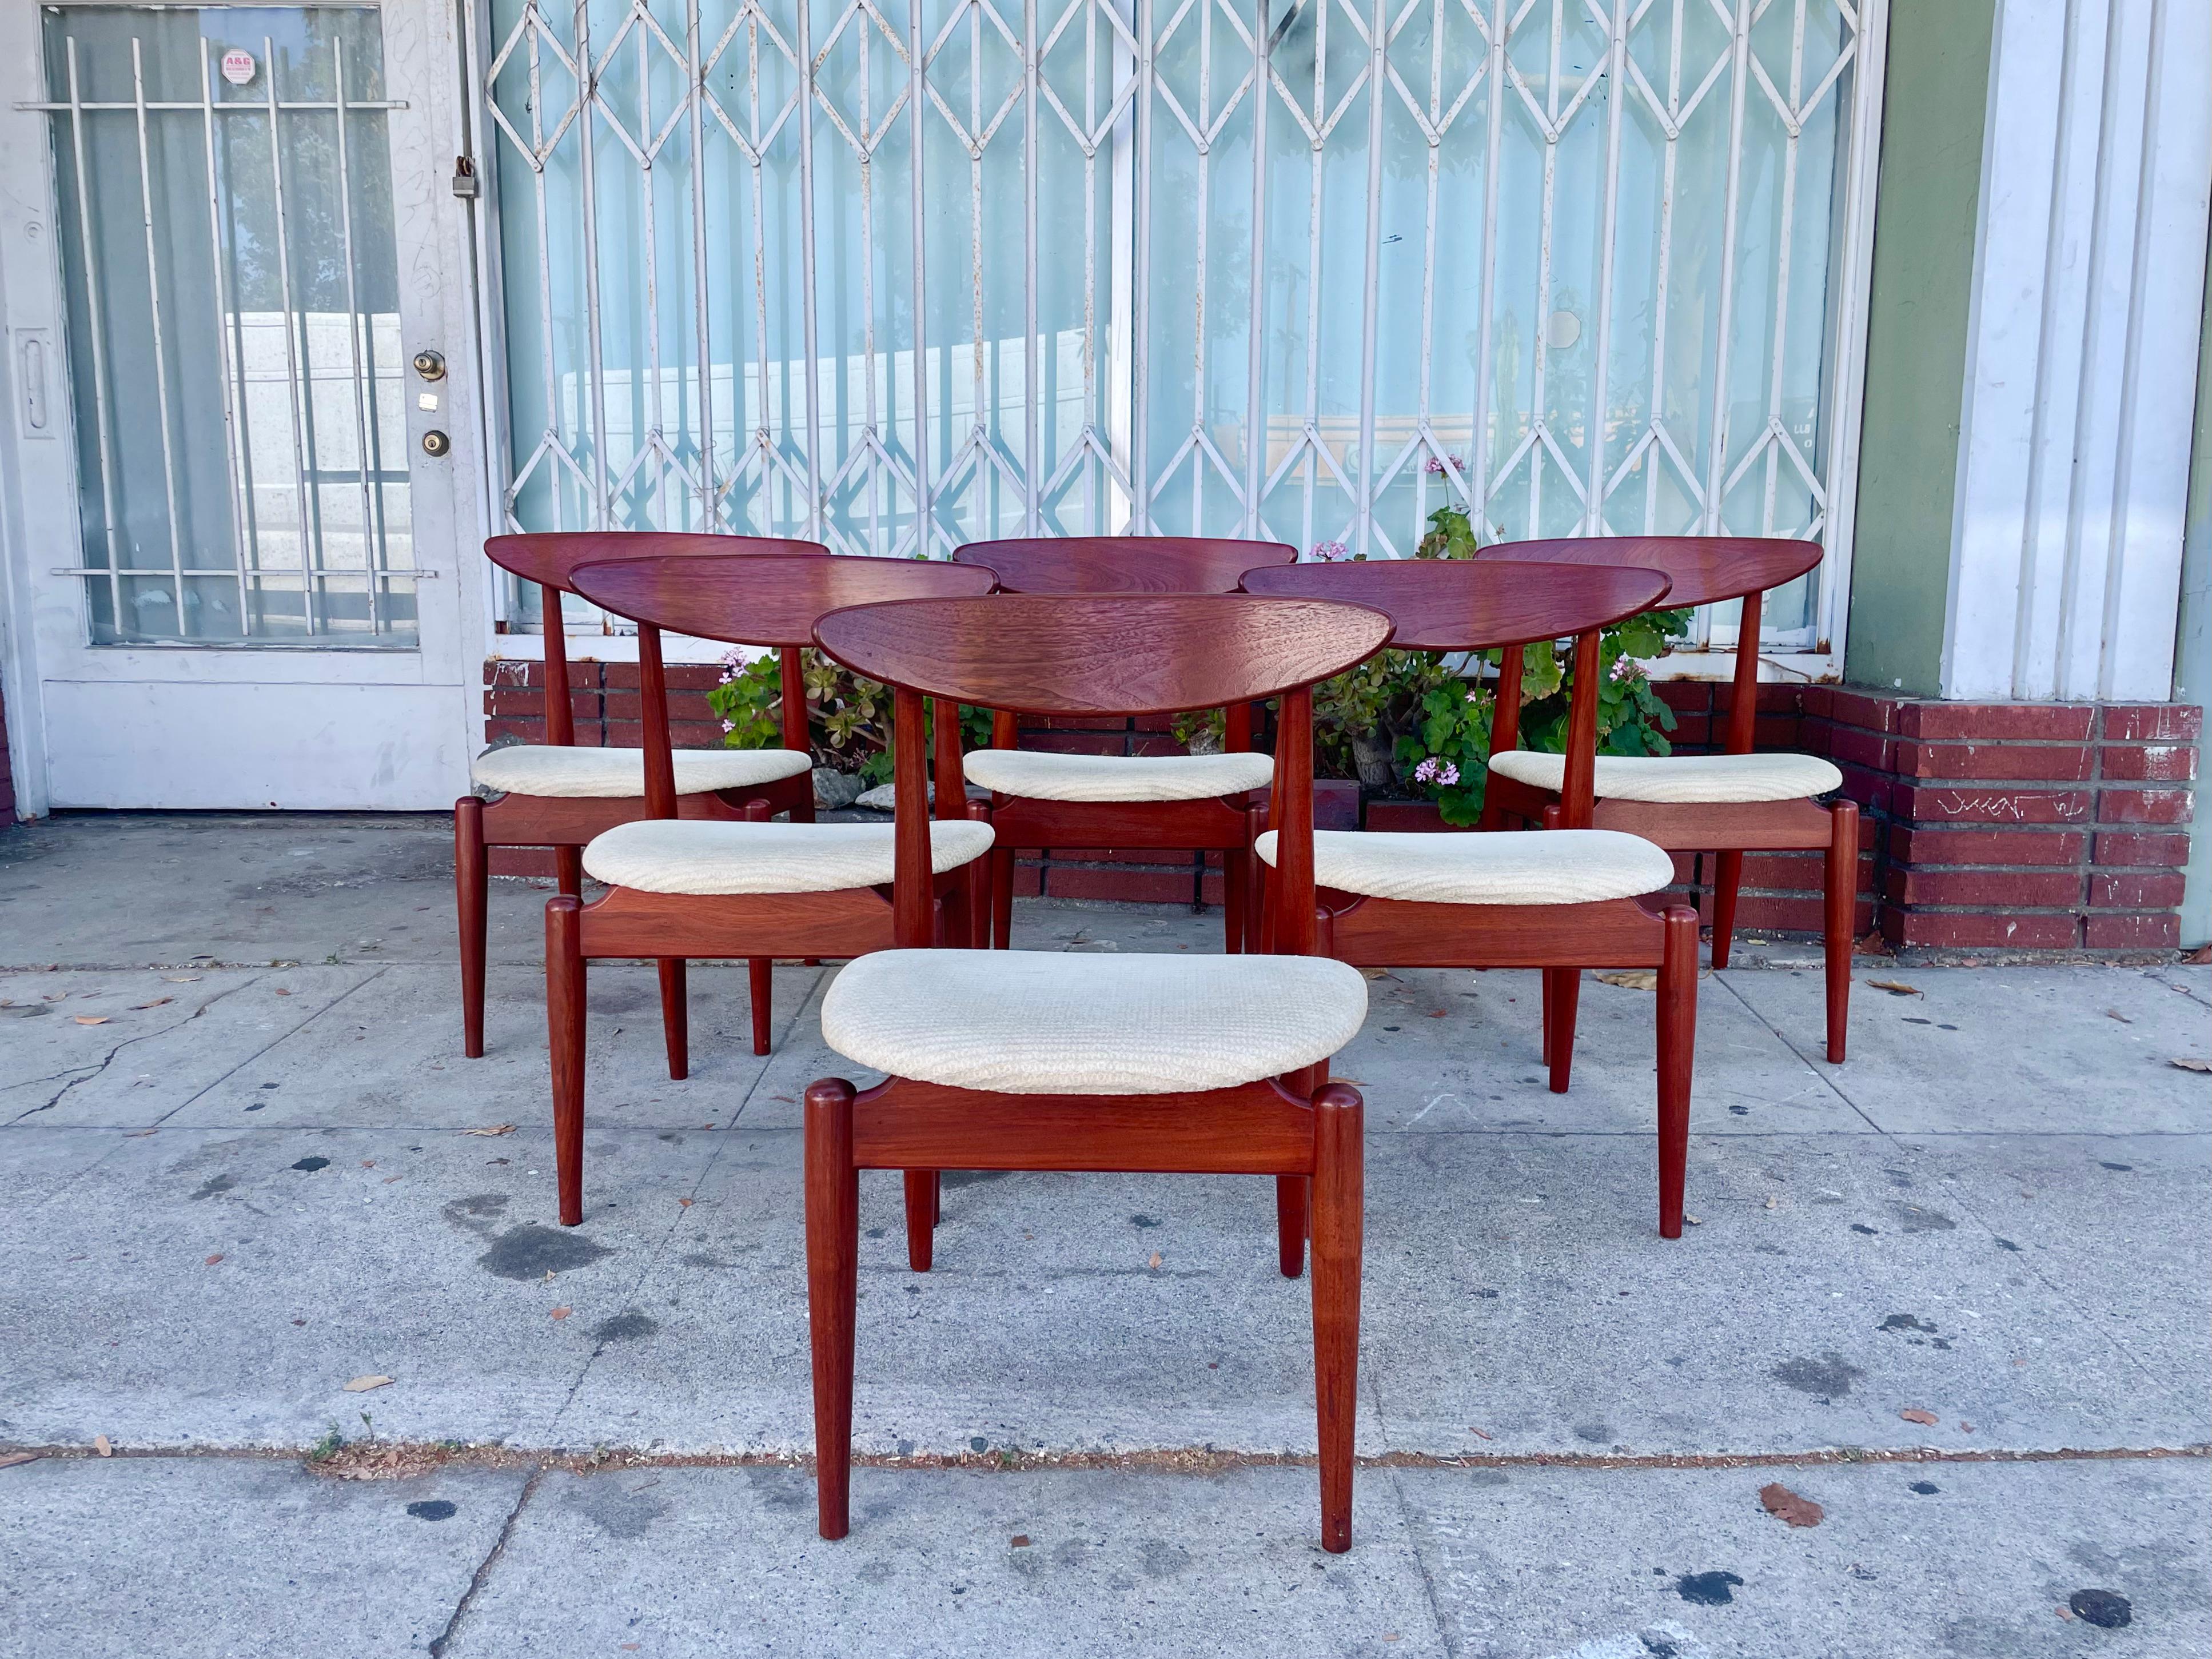 Vintage set of 6 mid-century teak dining chairs manufactured in Denmark circa 1960s. These Danish modern dining chairs were made of the highest quality teak, giving them an excellent color tone. The chairs also feature a wide backrest giving a great